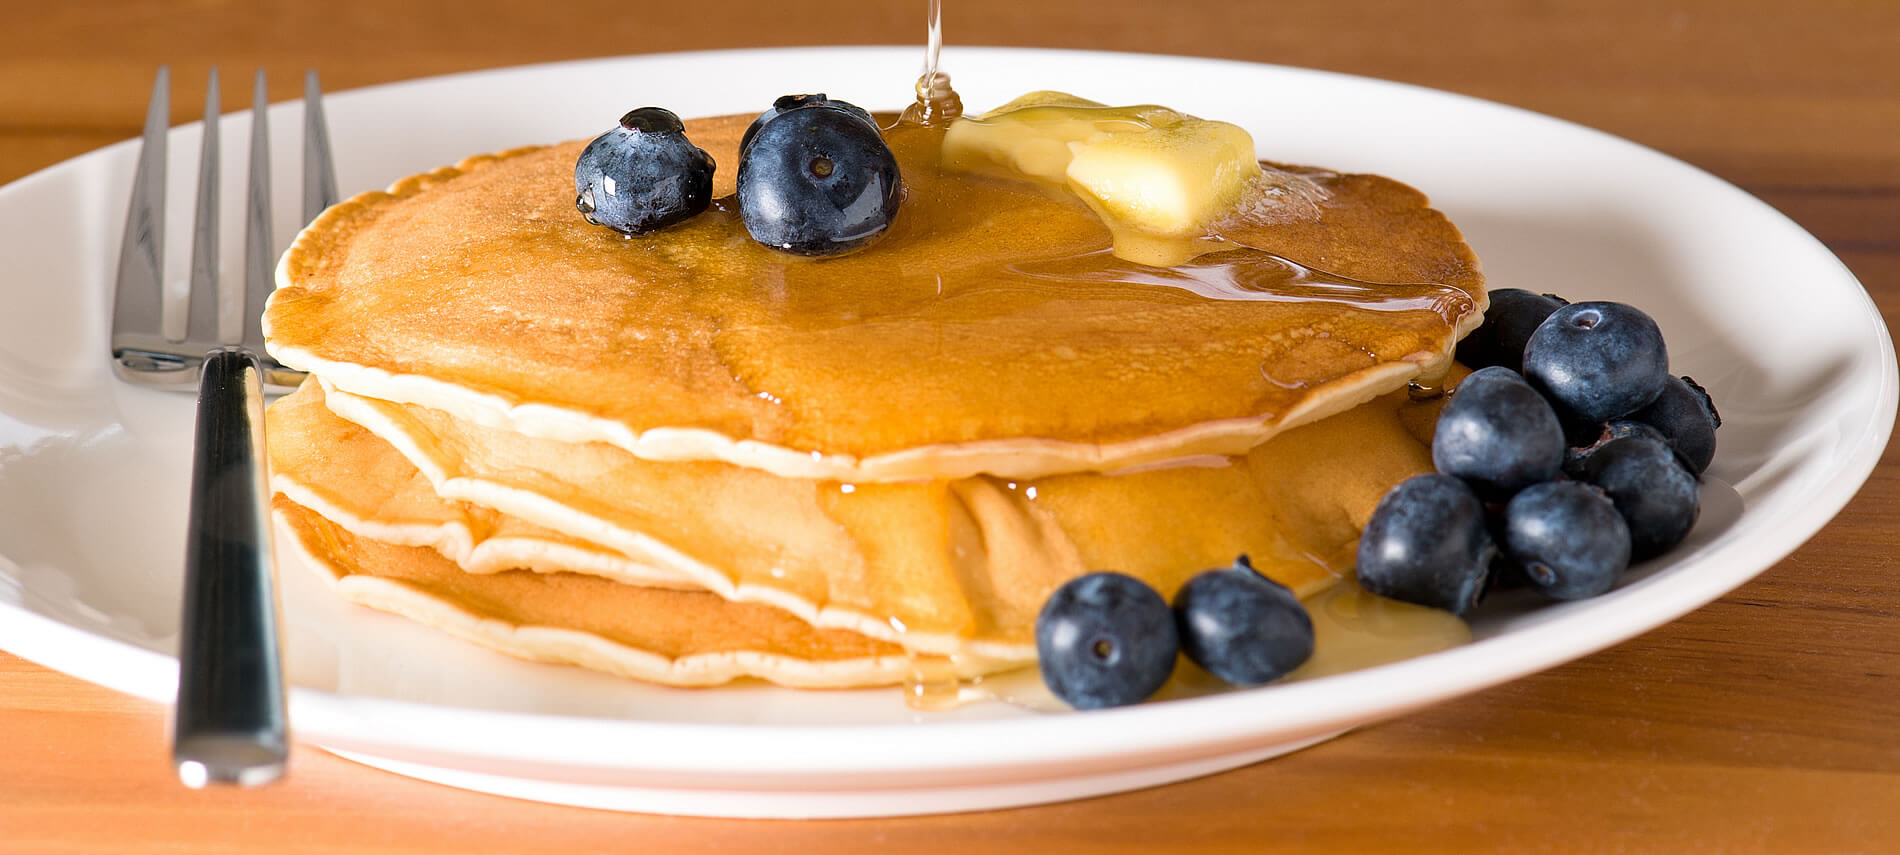 golden pancakes with blueberries on top